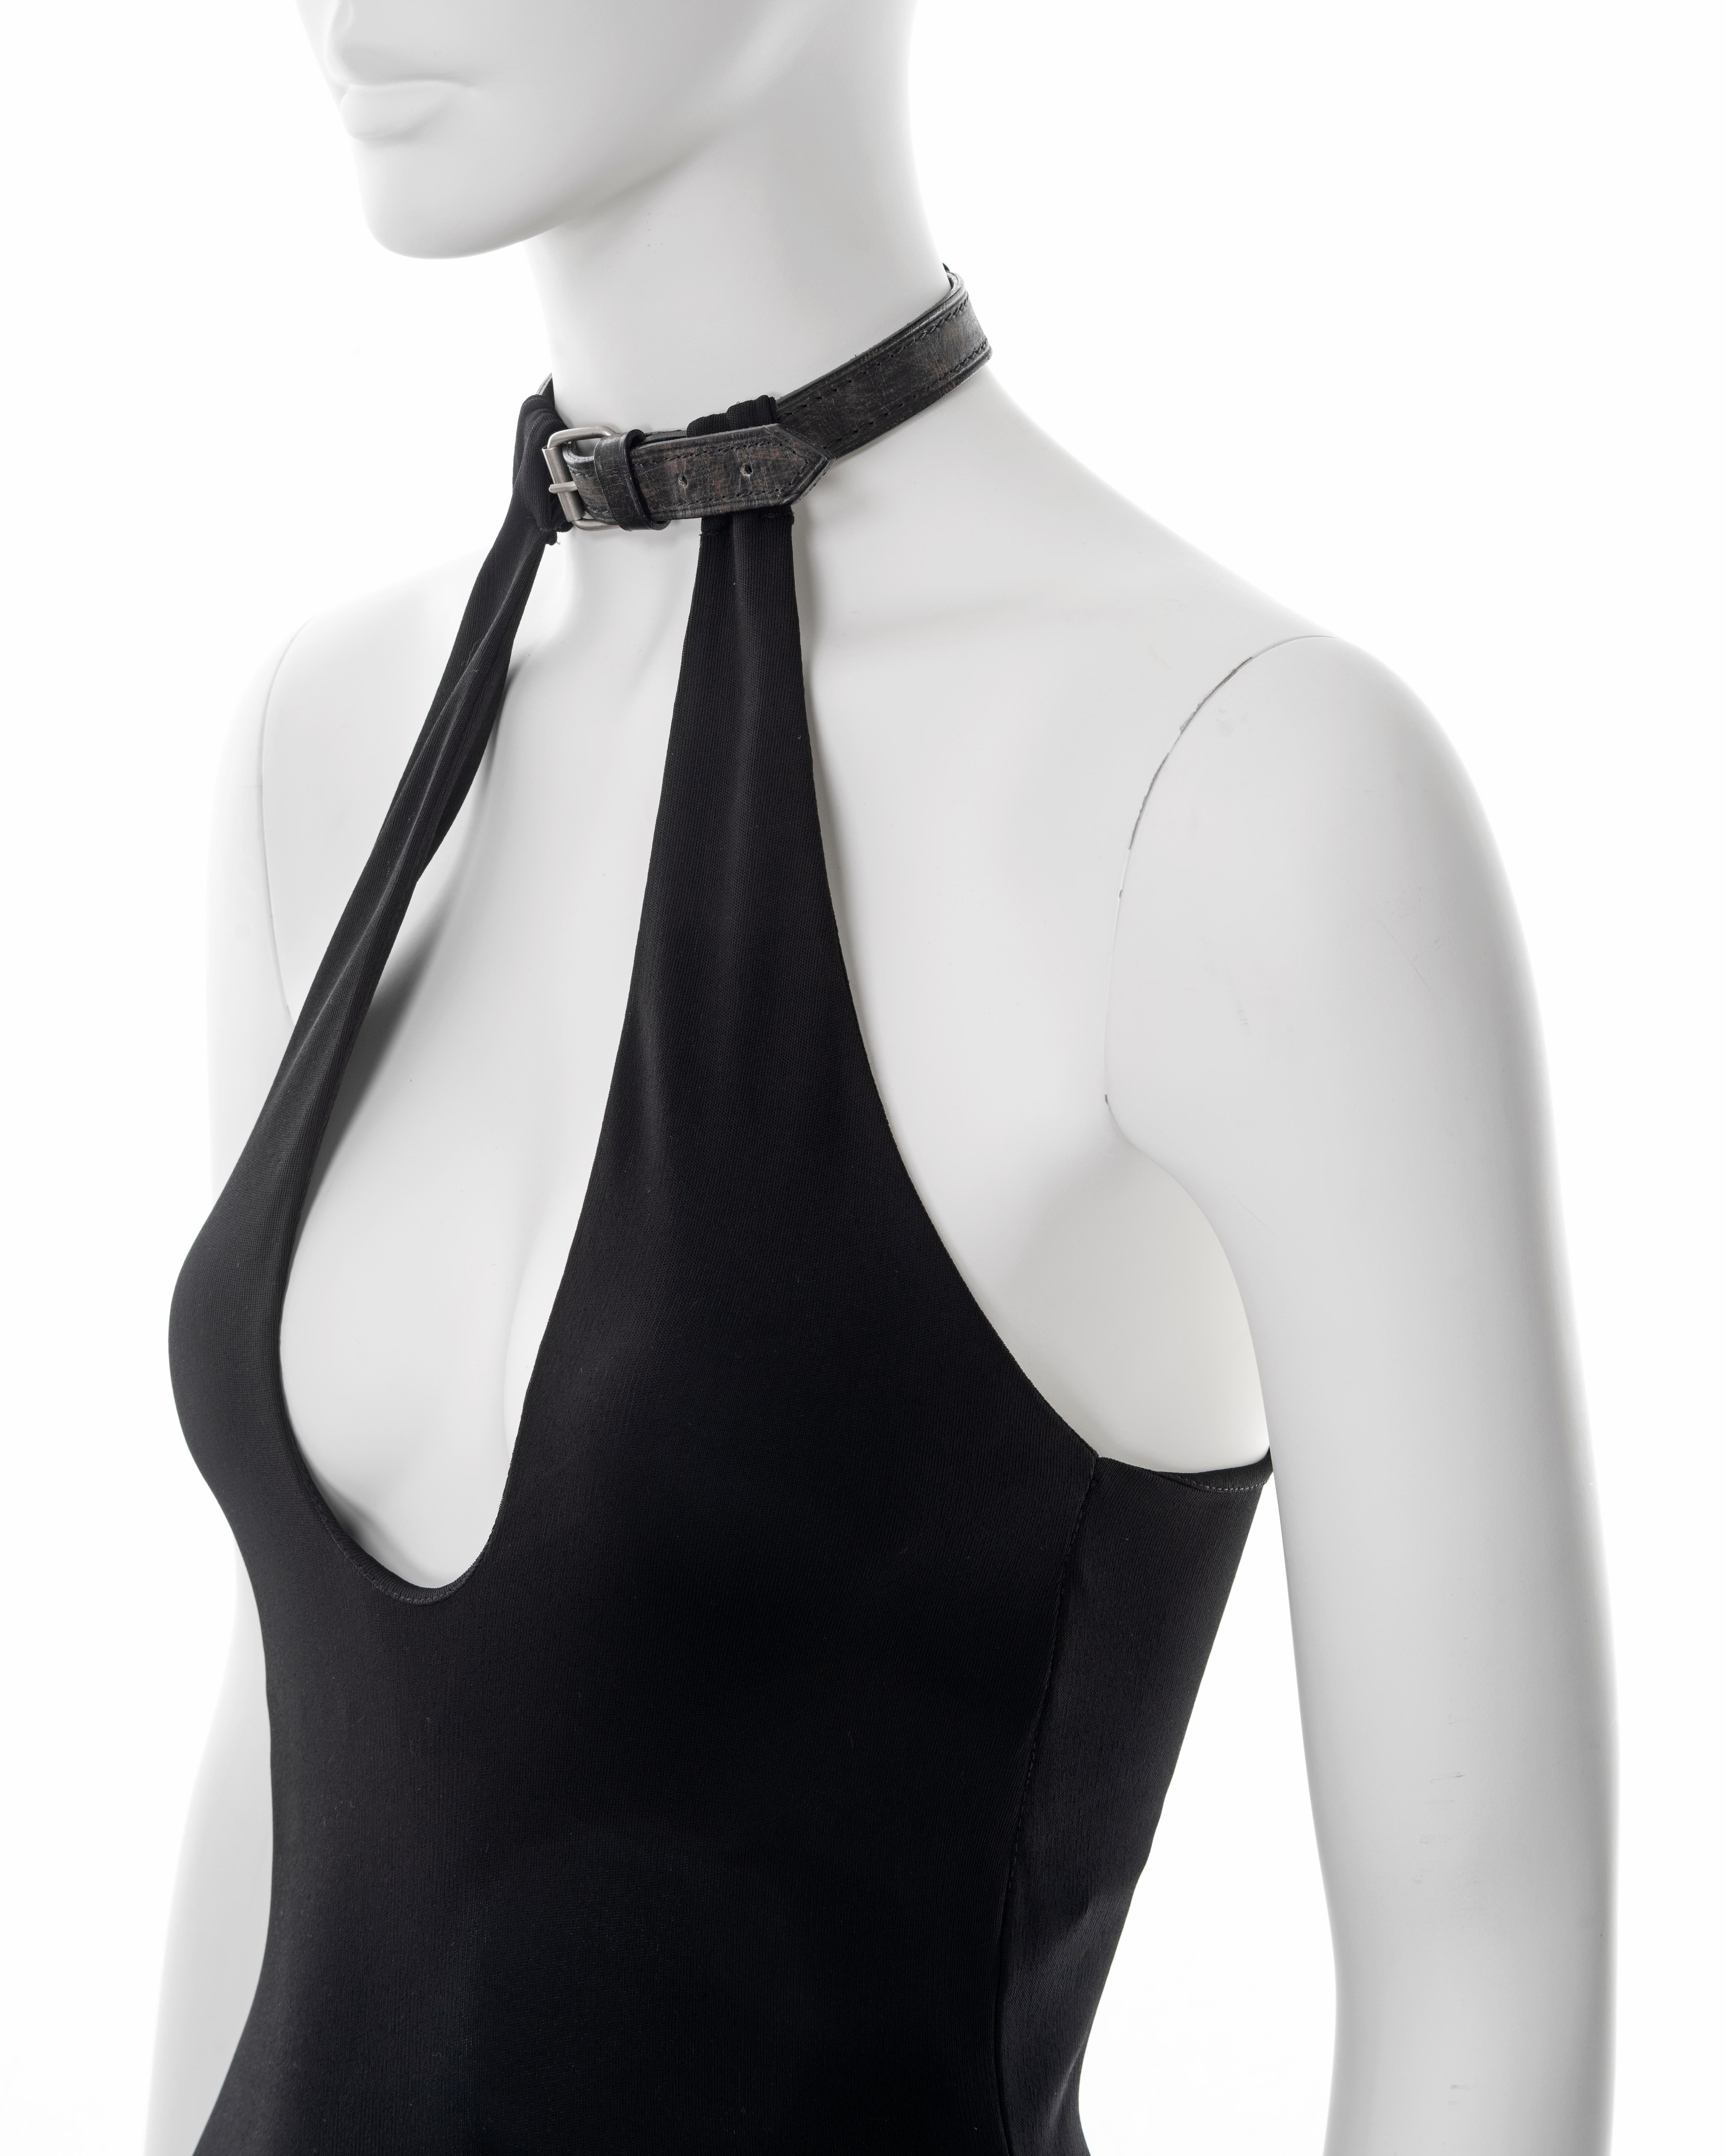 Jean Paul Gaultier black rayon maxi dress with leather choker, ss 2001 For Sale 4